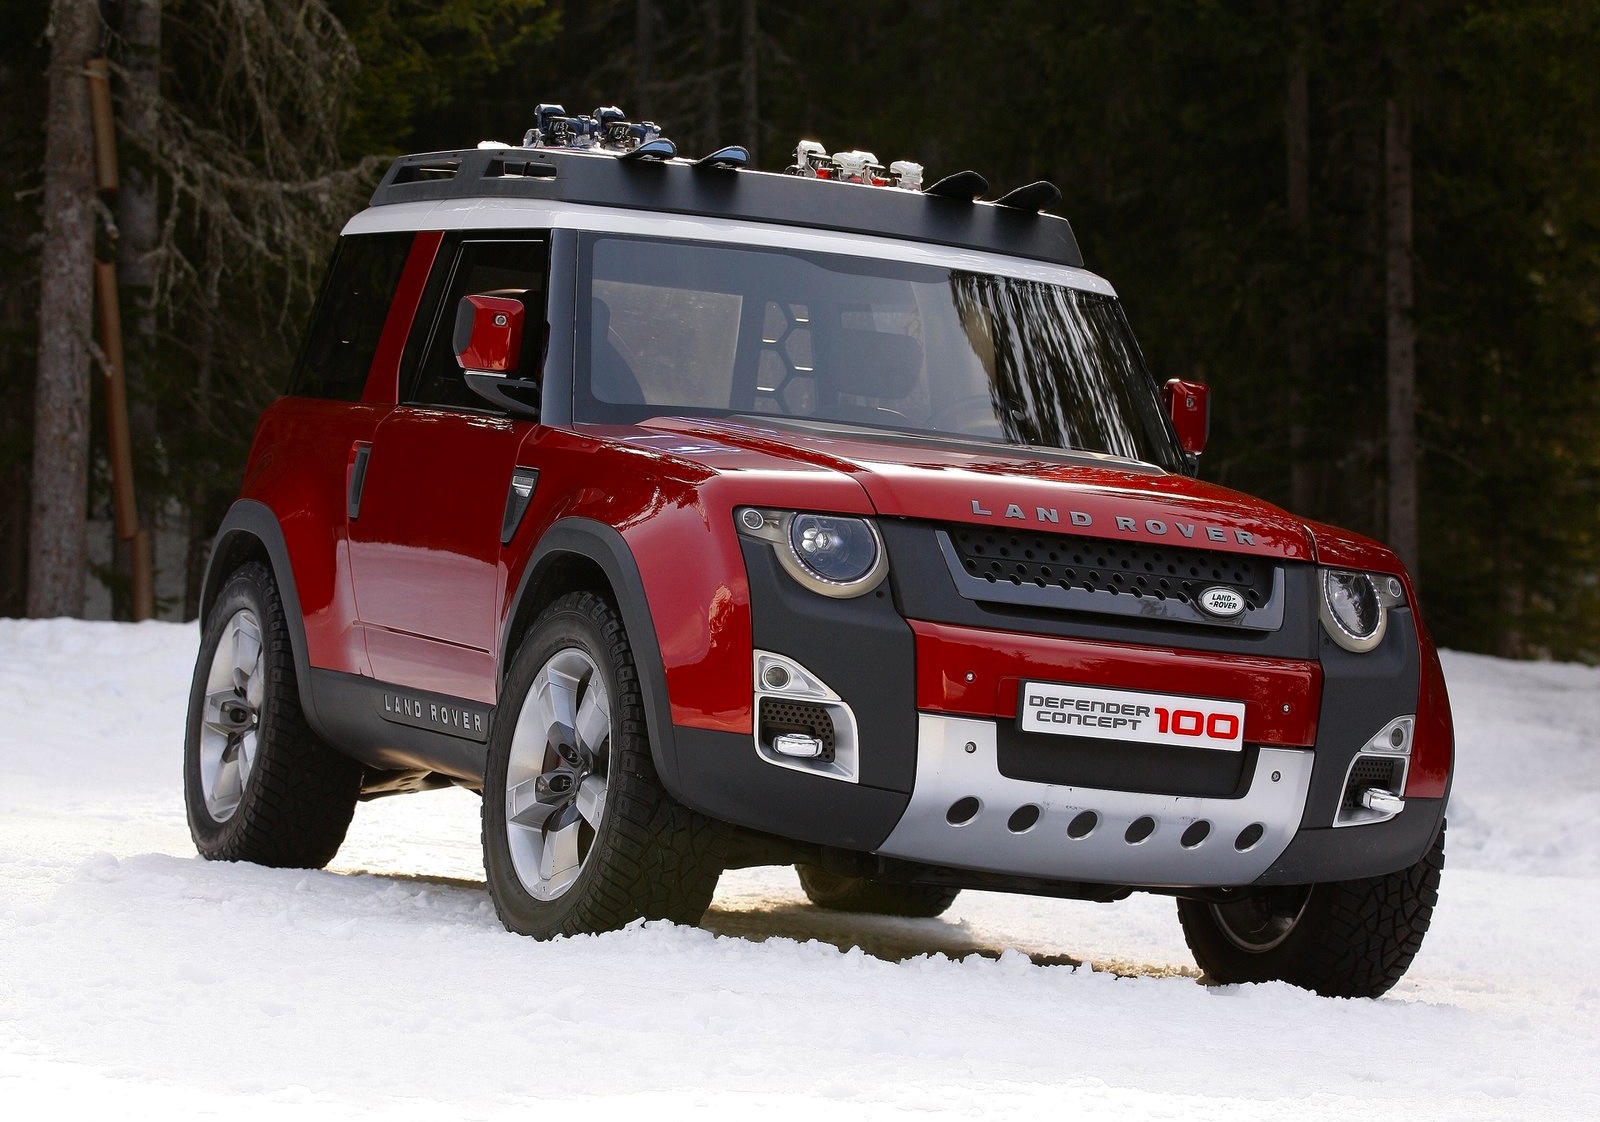 2015 Land Rover Defender new model must appeal to the